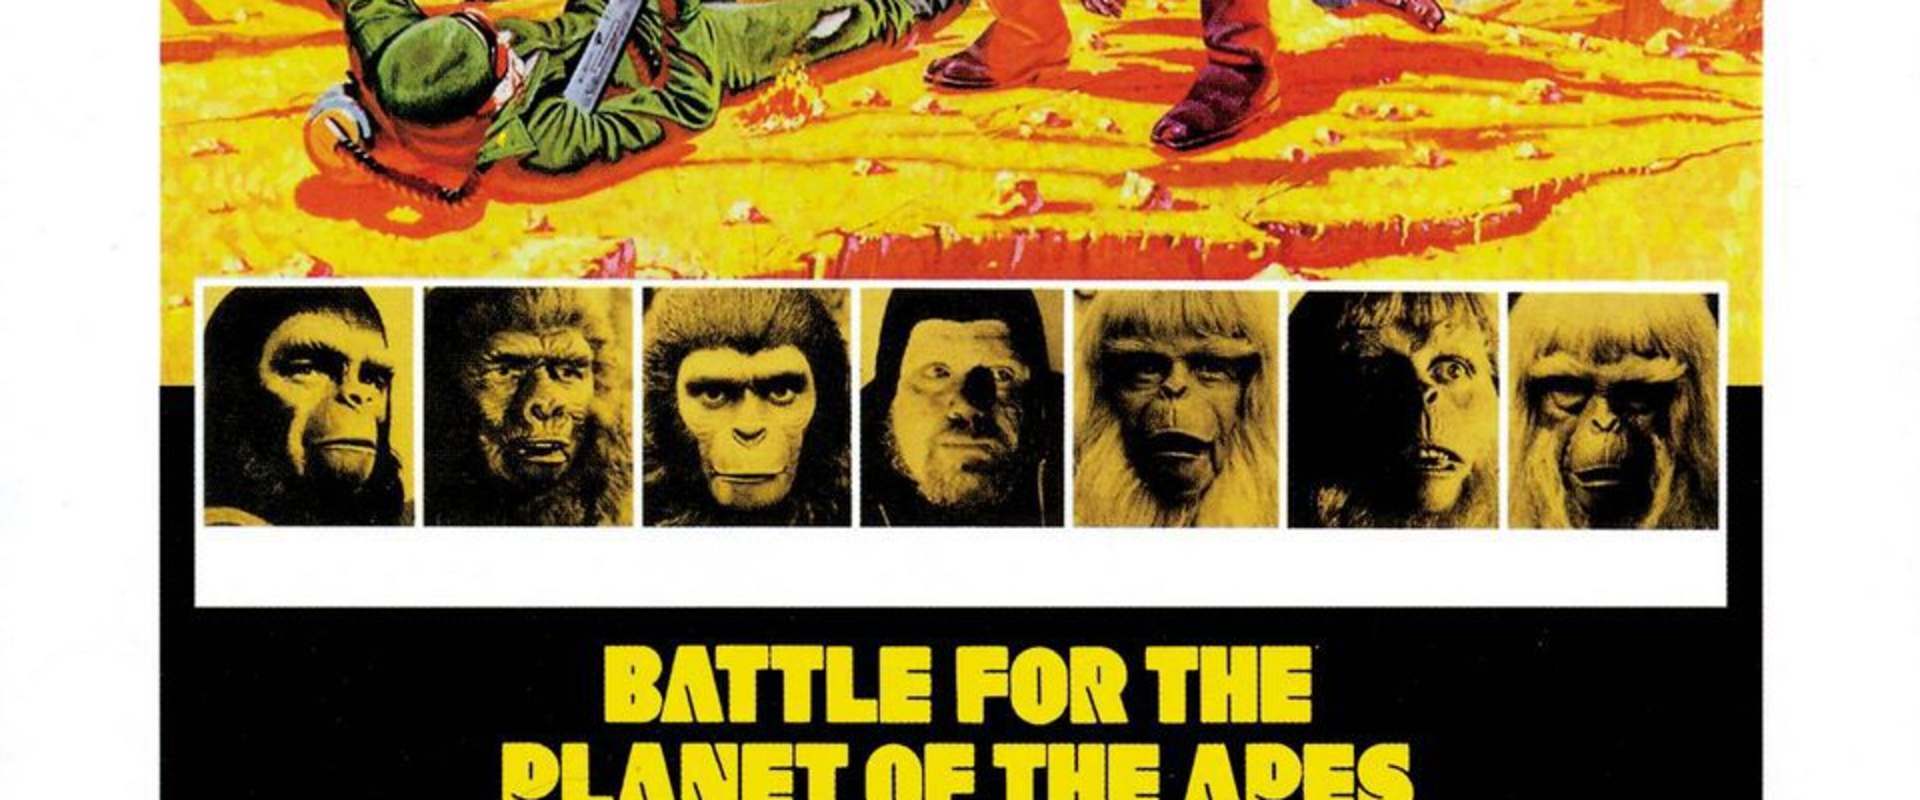 Battle for the Planet of the Apes background 1